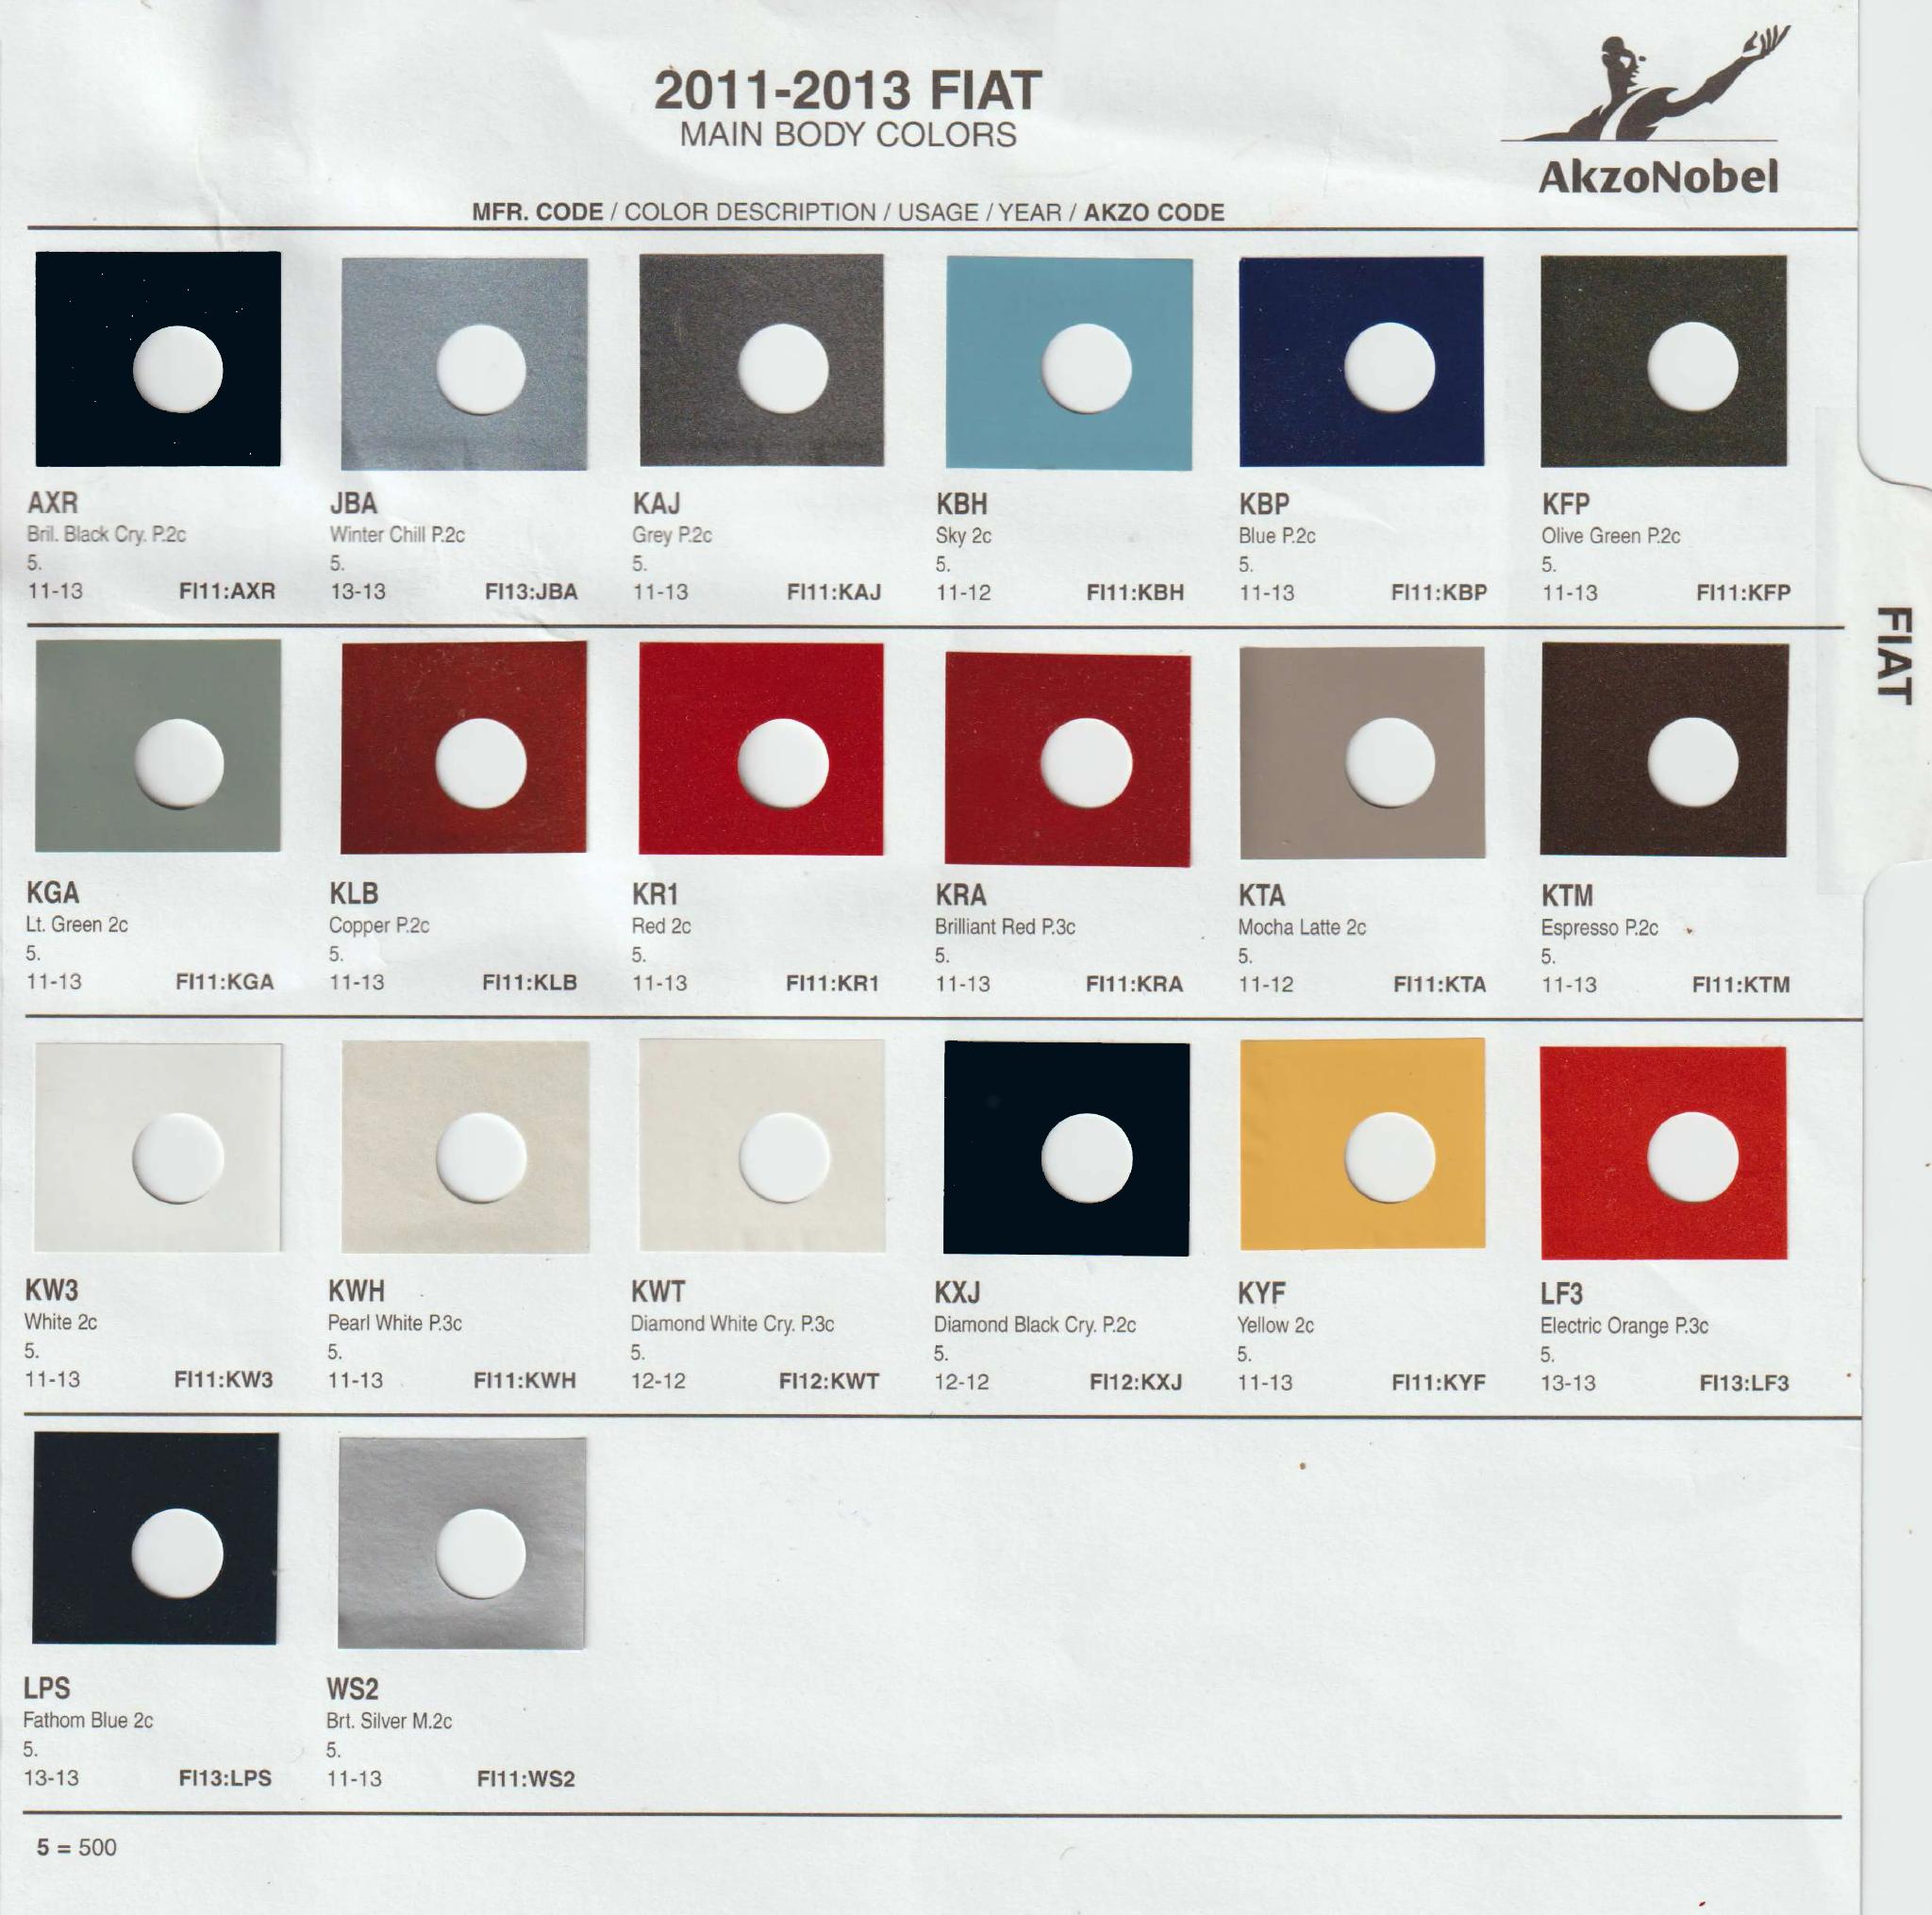 oem codes, color examples, and ordering codes for 2010 2011 2012 and 2013 Fiat Vehicles exterior colors